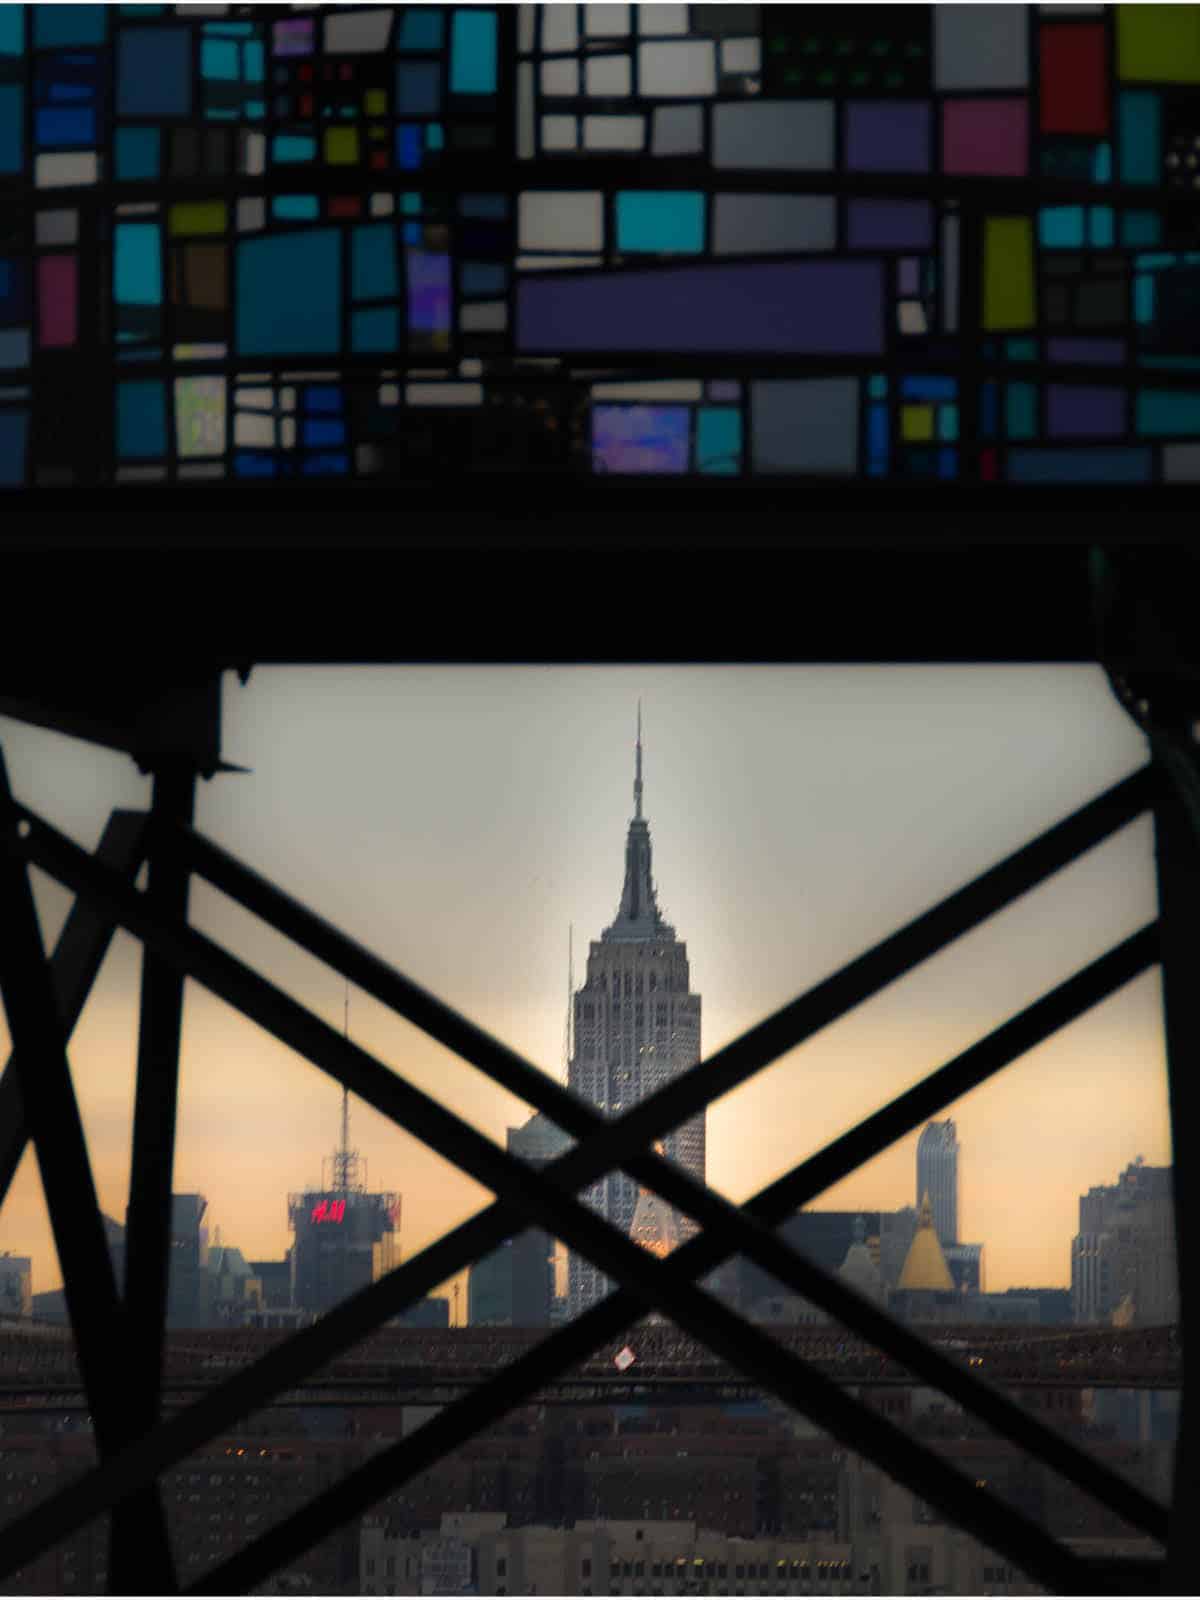 Looking underneath Watertower II by Tom Fruin towards the Empire State Building in Manhattan.